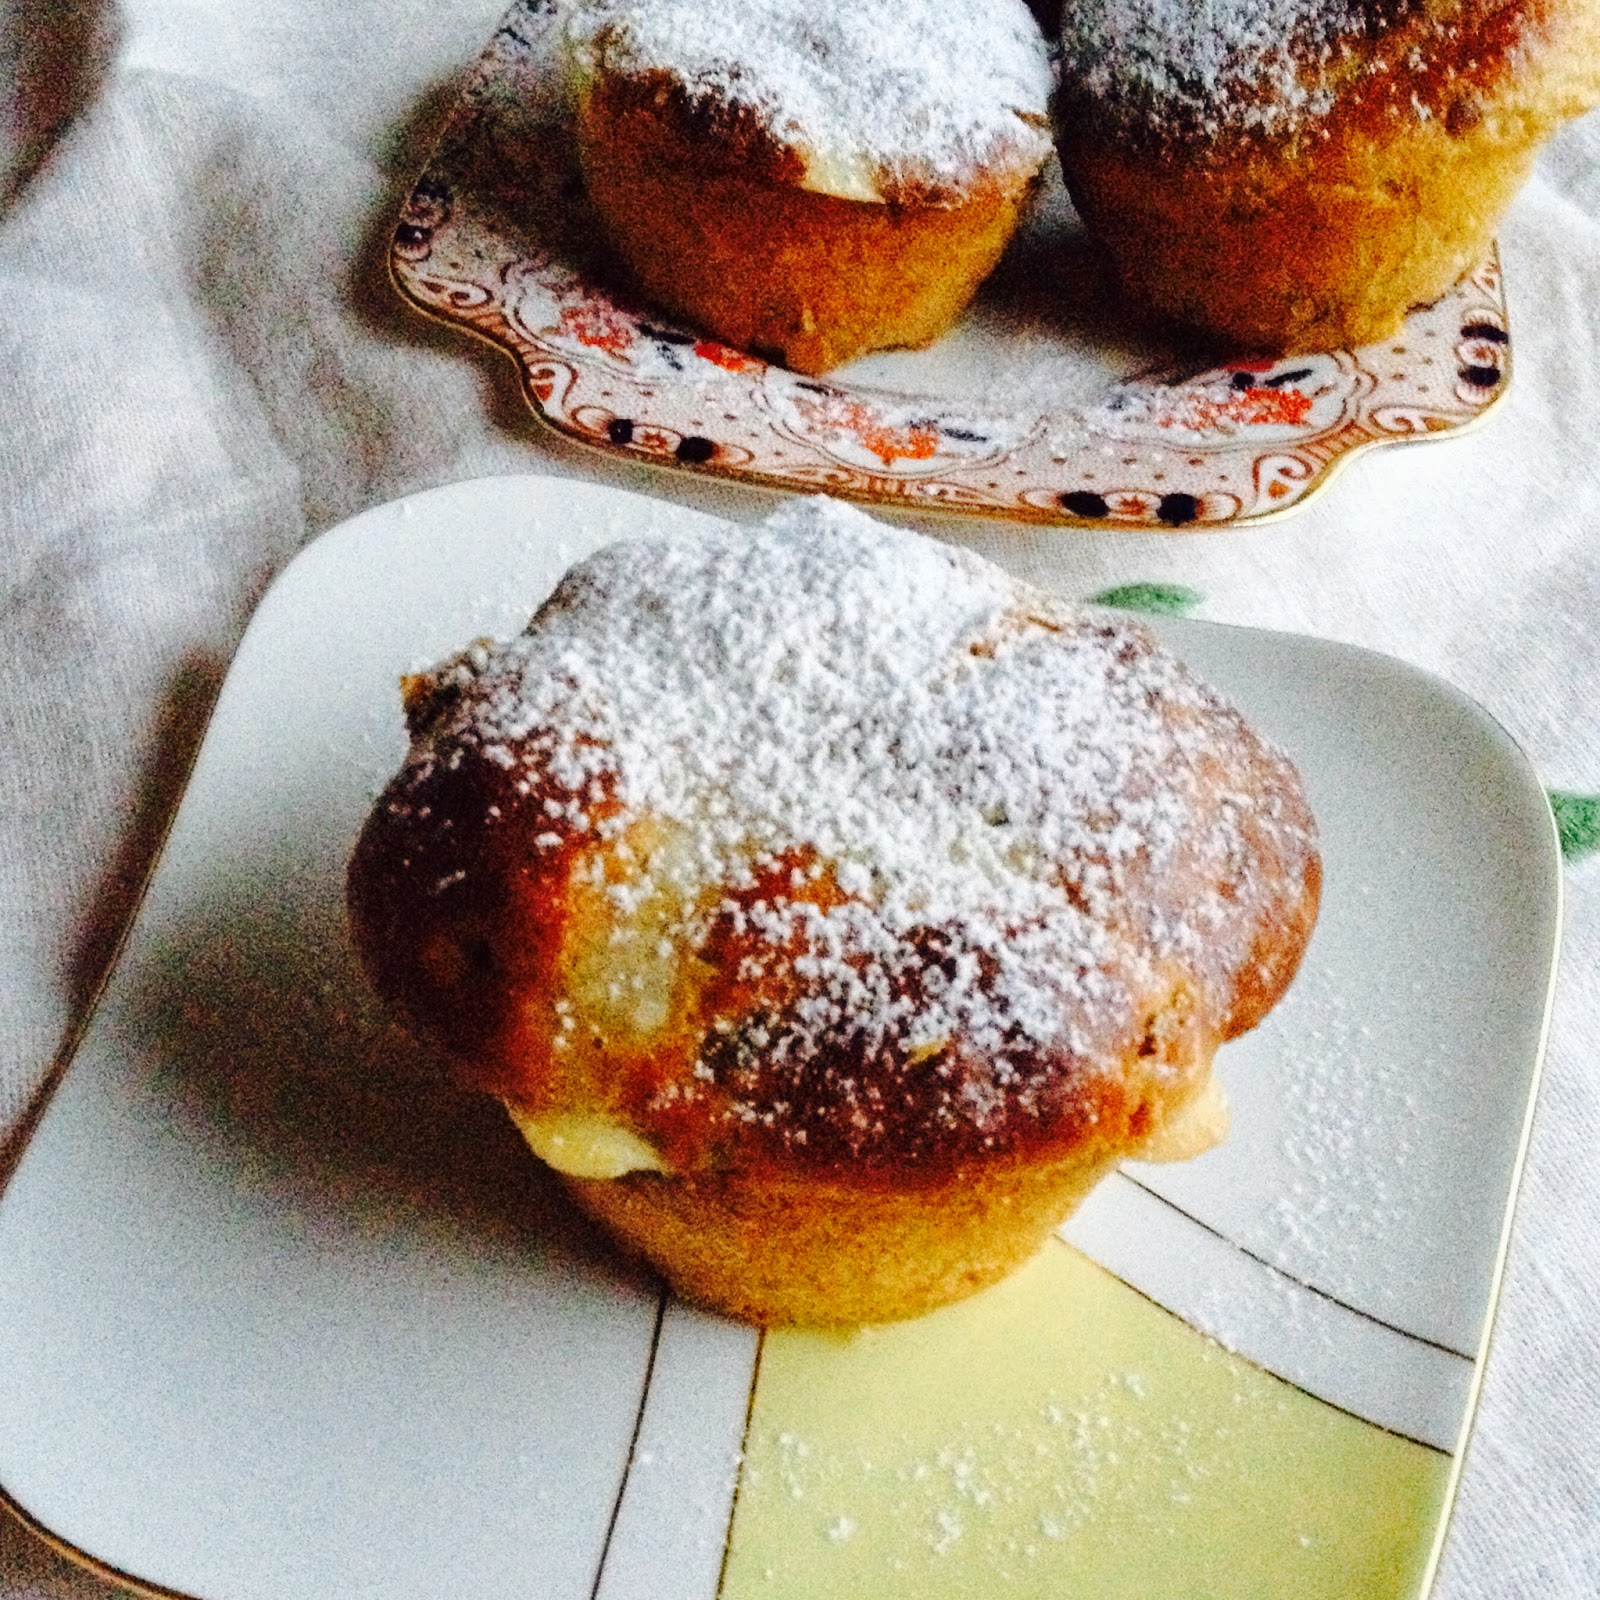 Easy Easter Brioche Buns Recipe And Photo: Lucy Corry/The Kitchenmaid